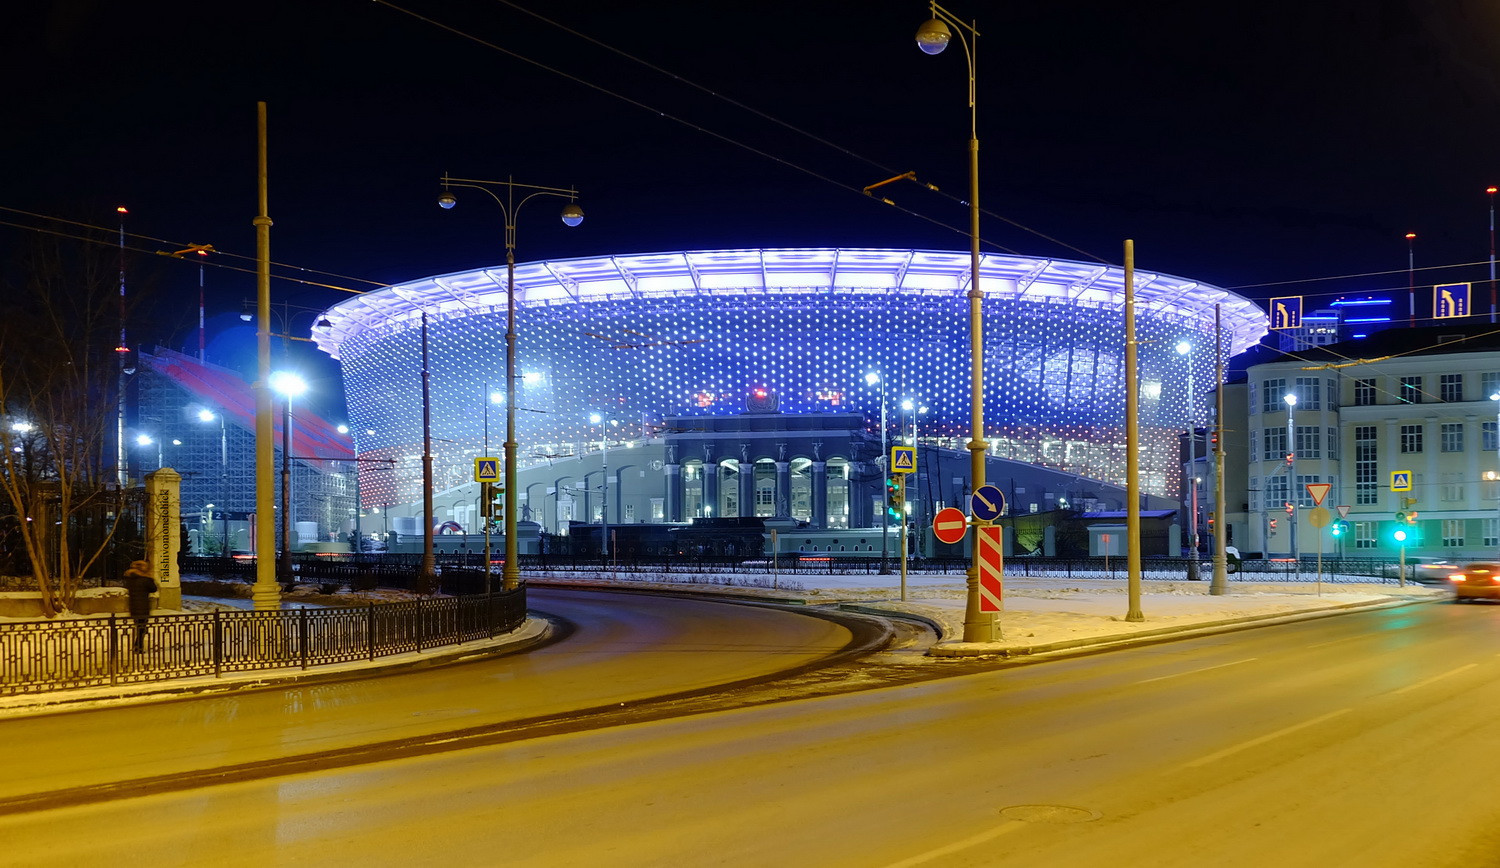 Yekaterinburg Arena has been proposed as one of the venues to be used for the 2023 Summer Universiade ©Getty Images